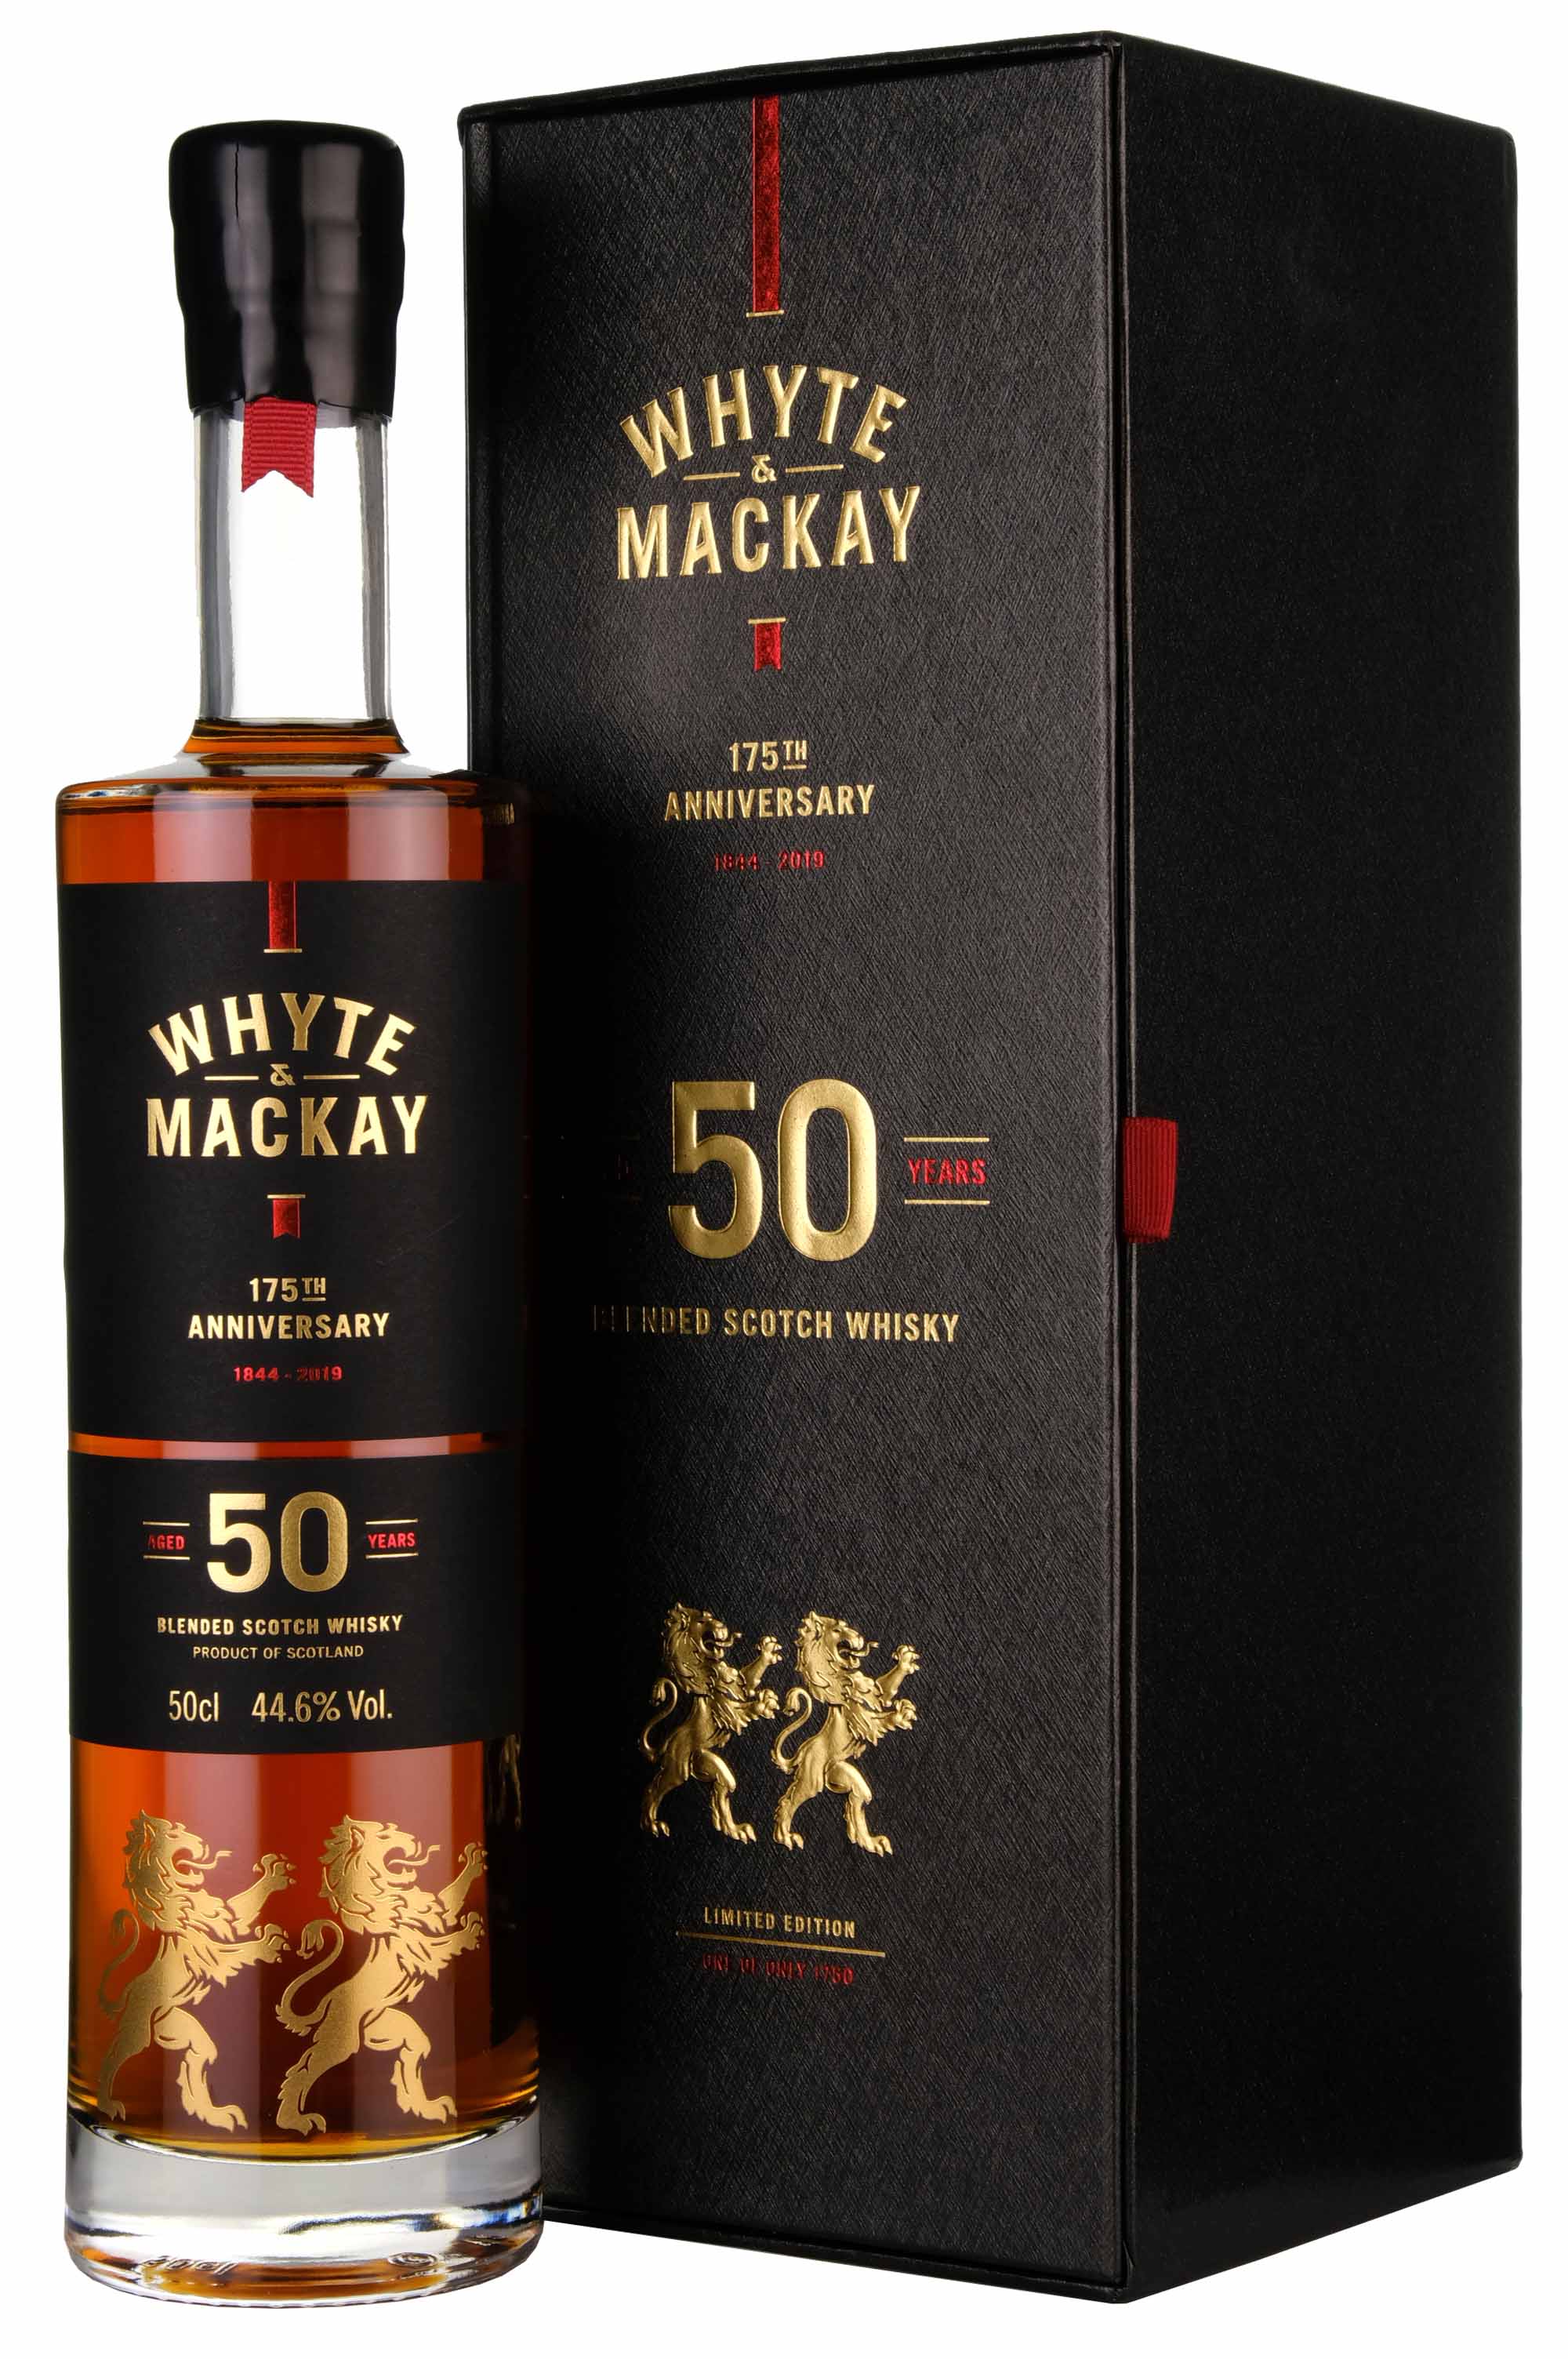 Whyte & Mackay 50 Year Old 175th Anniversary Edition